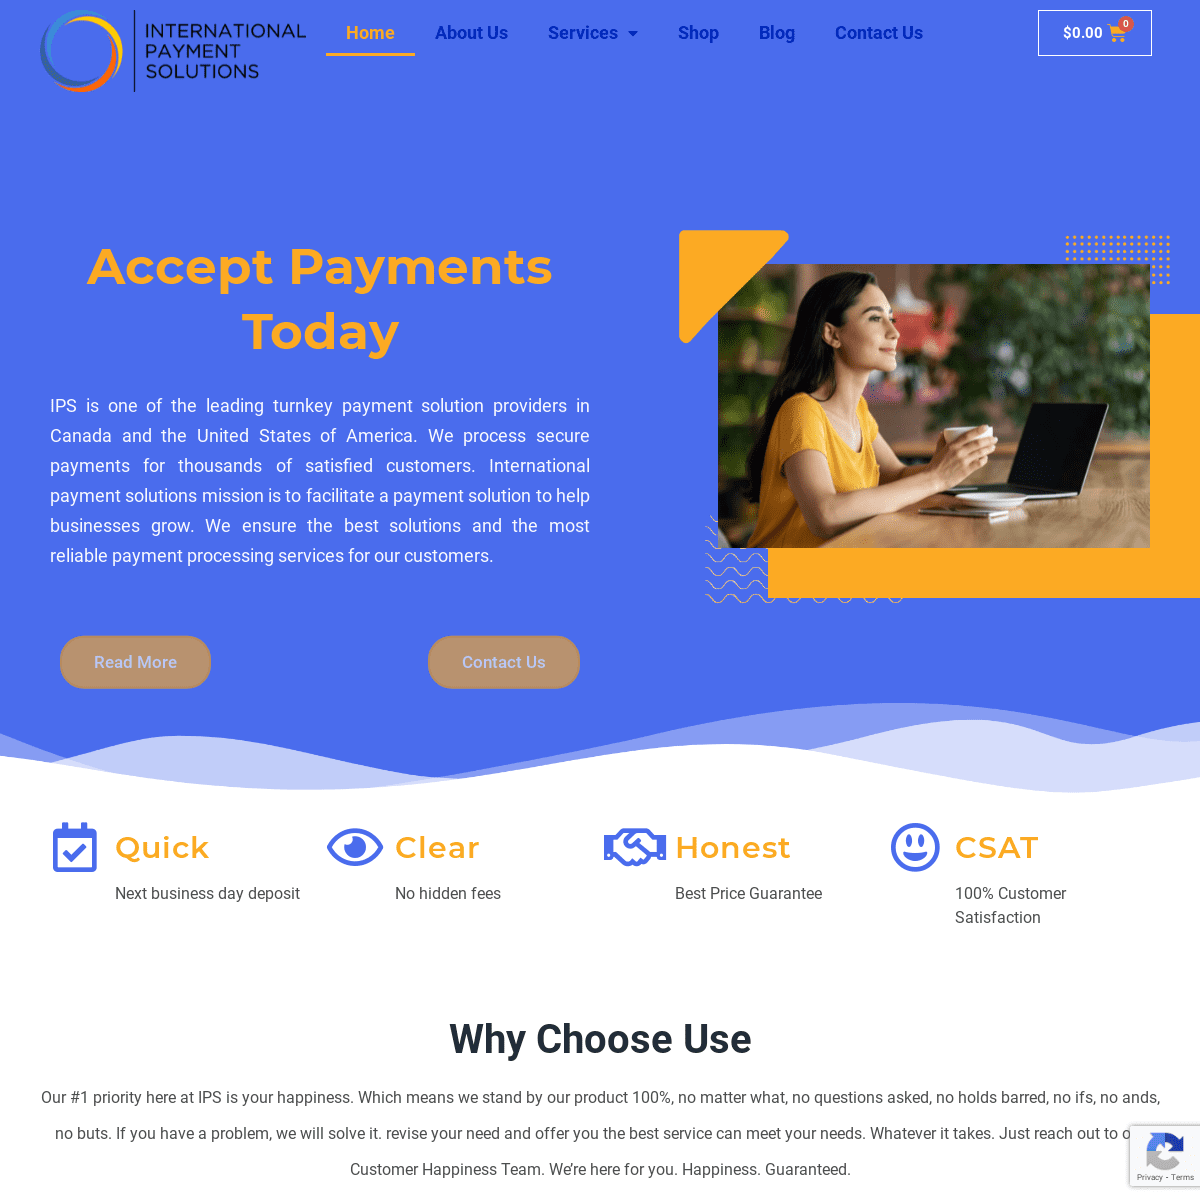 A complete backup of https://internationalpaymentsolutions.ca